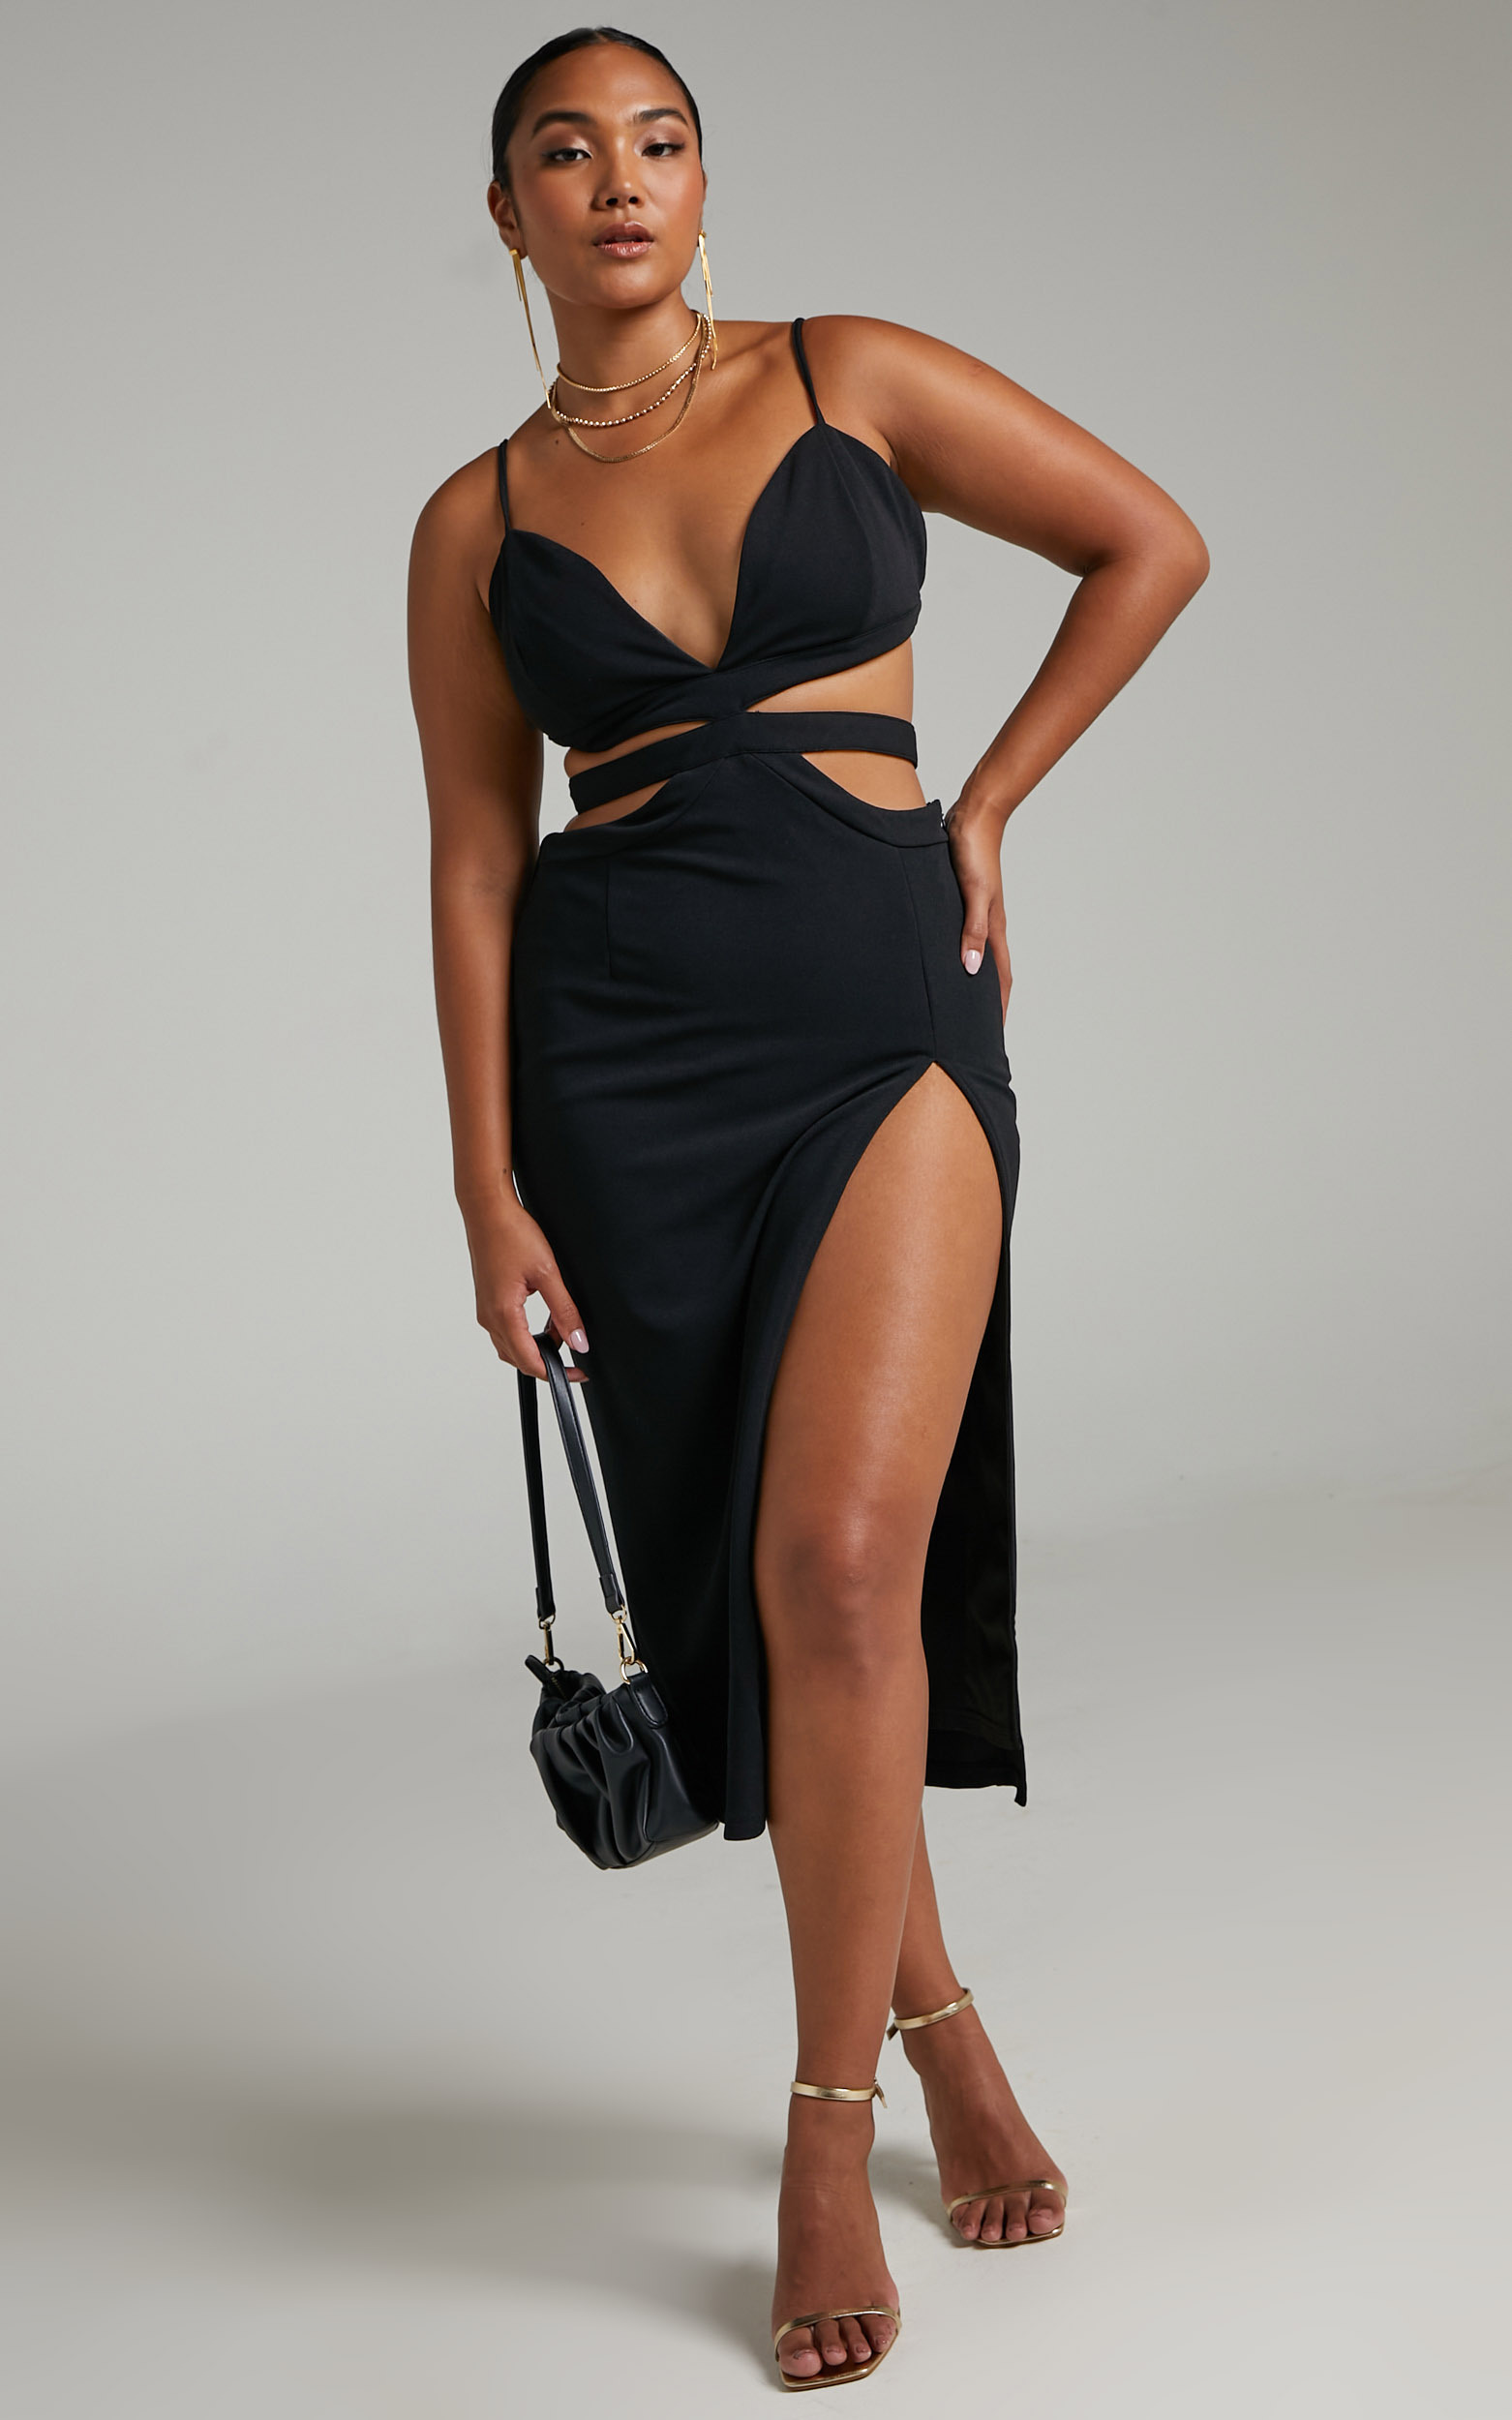 Juvilyn Strappy Plunge Neck Midi Dress in Black - 06, BLK1, hi-res image number null